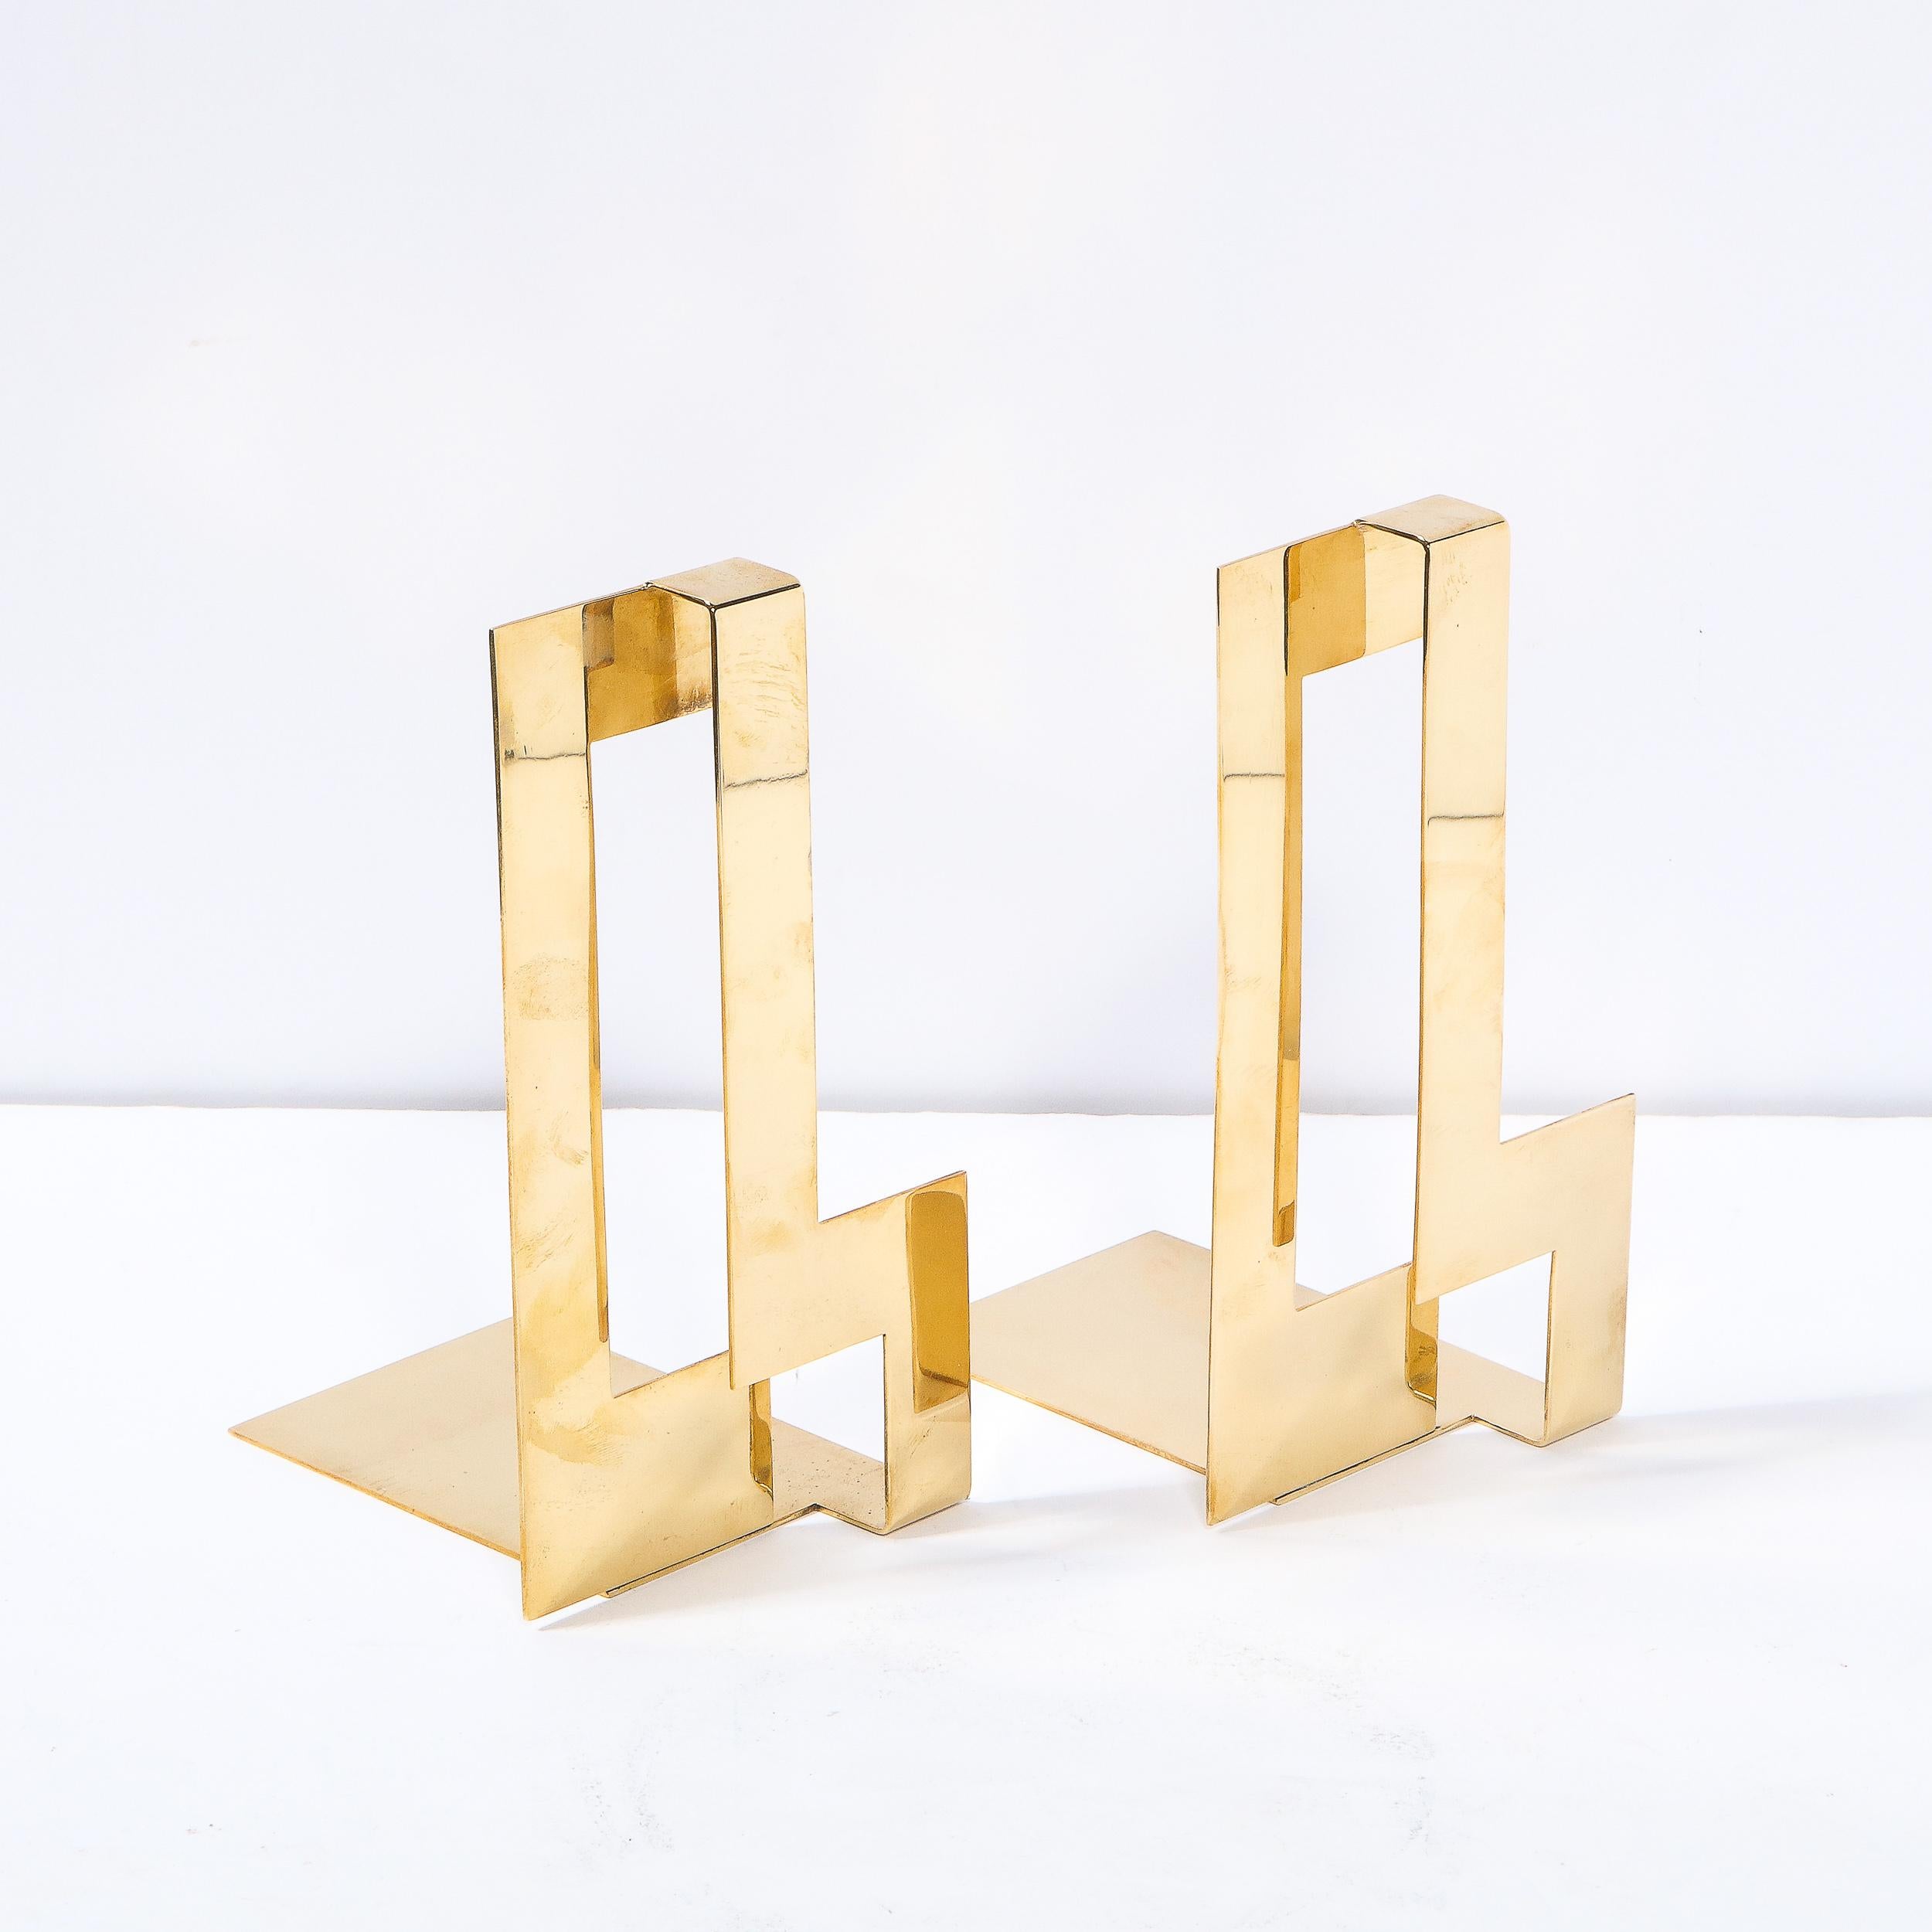 Pair of Scandinavian Modernist Polished Brass Rectilinear Bookends by Skultana In Excellent Condition For Sale In New York, NY